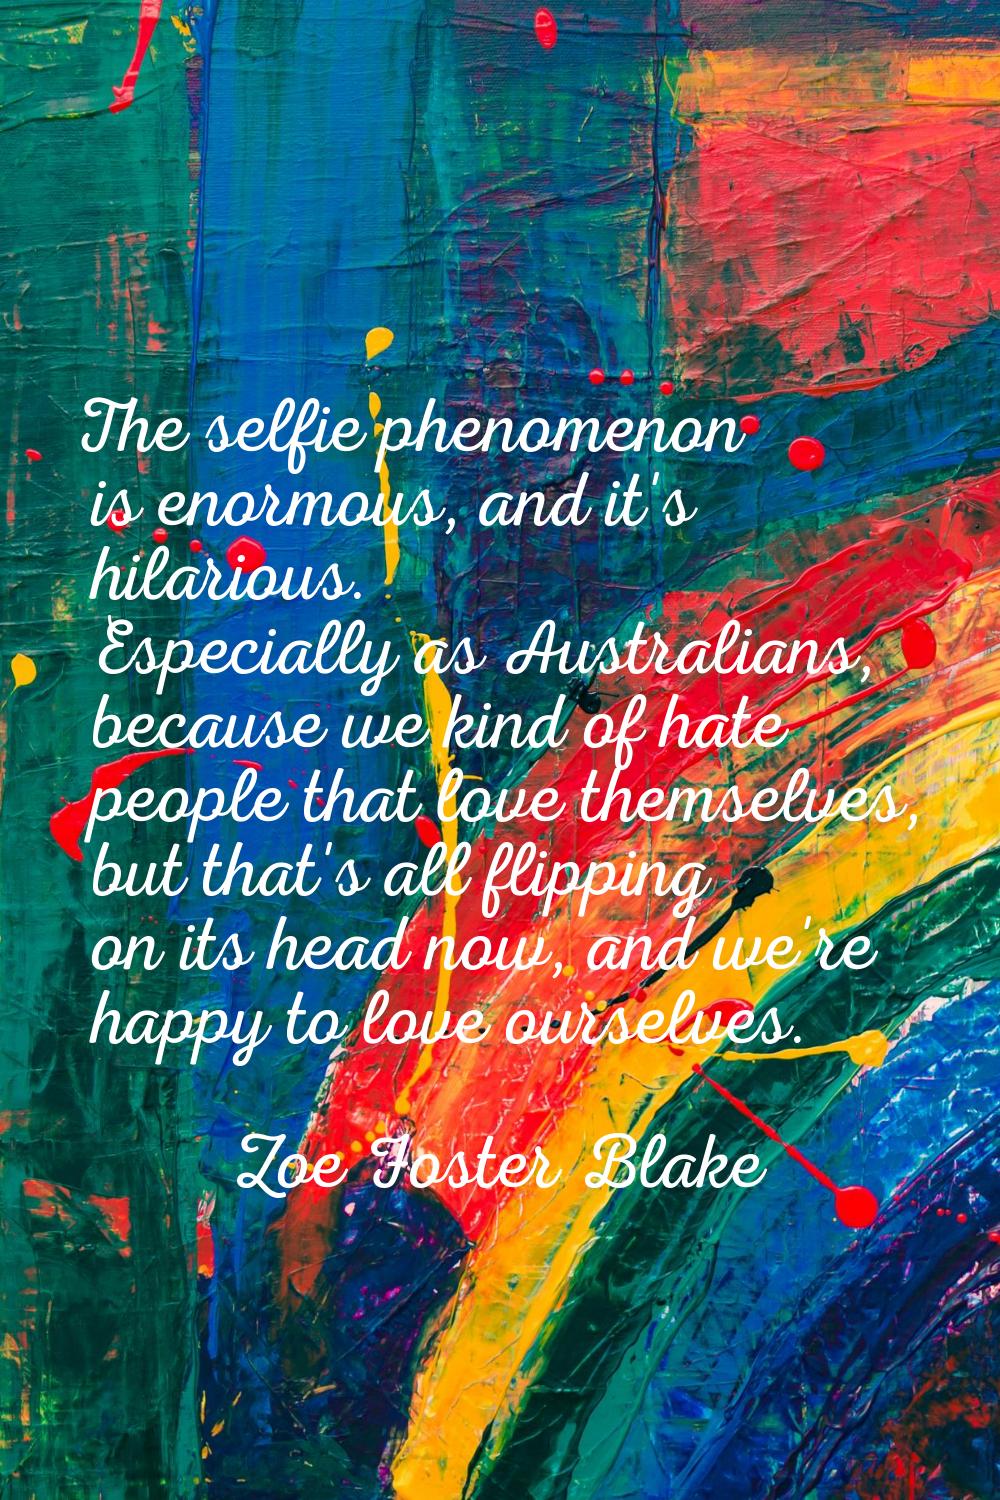 The selfie phenomenon is enormous, and it's hilarious. Especially as Australians, because we kind o